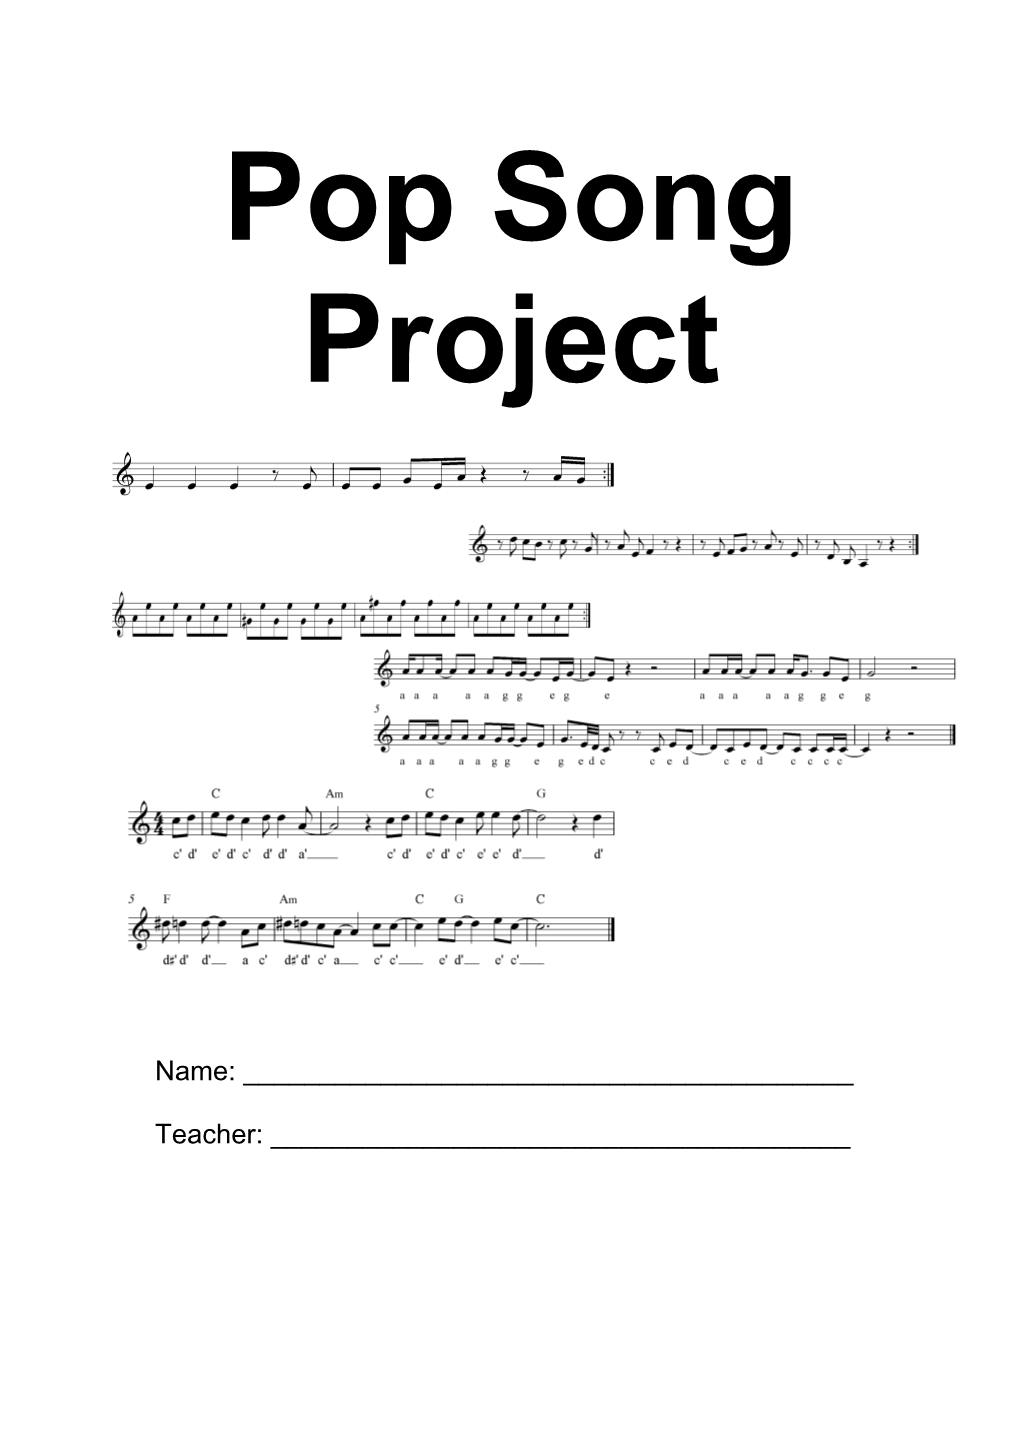 Pop Song Project